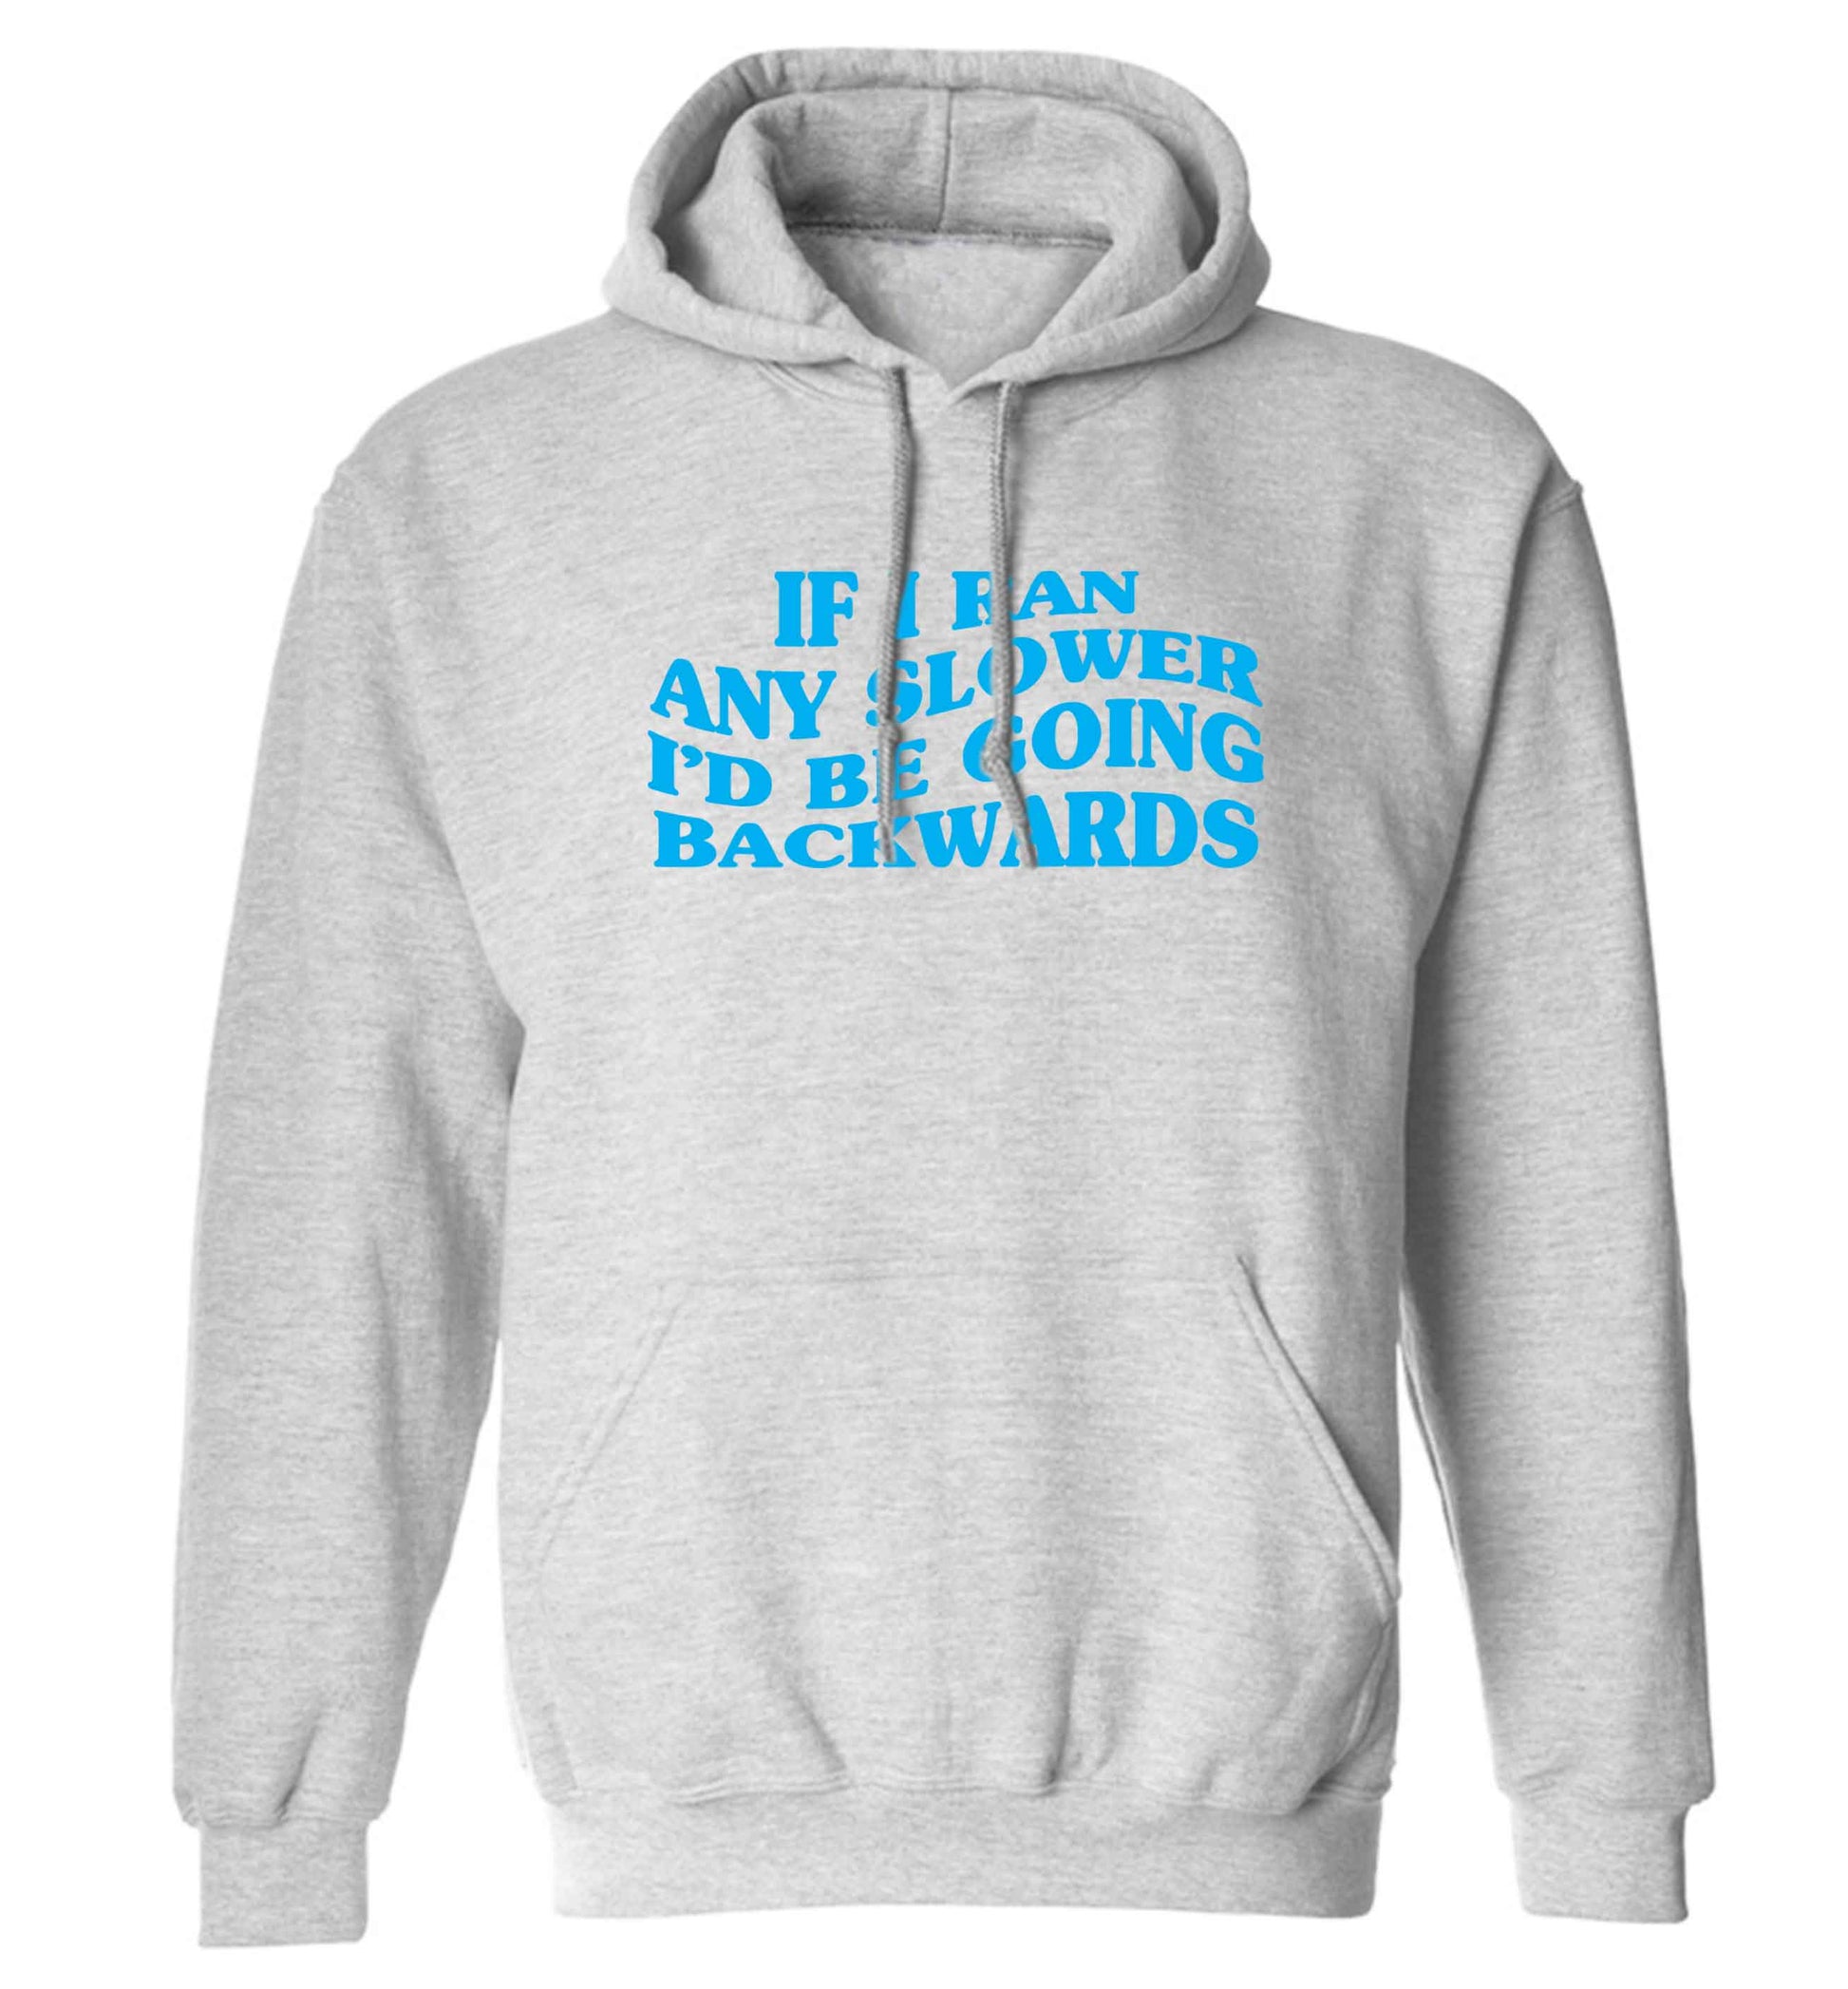 If I ran any slower I'd be going backwards adults unisex grey hoodie 2XL